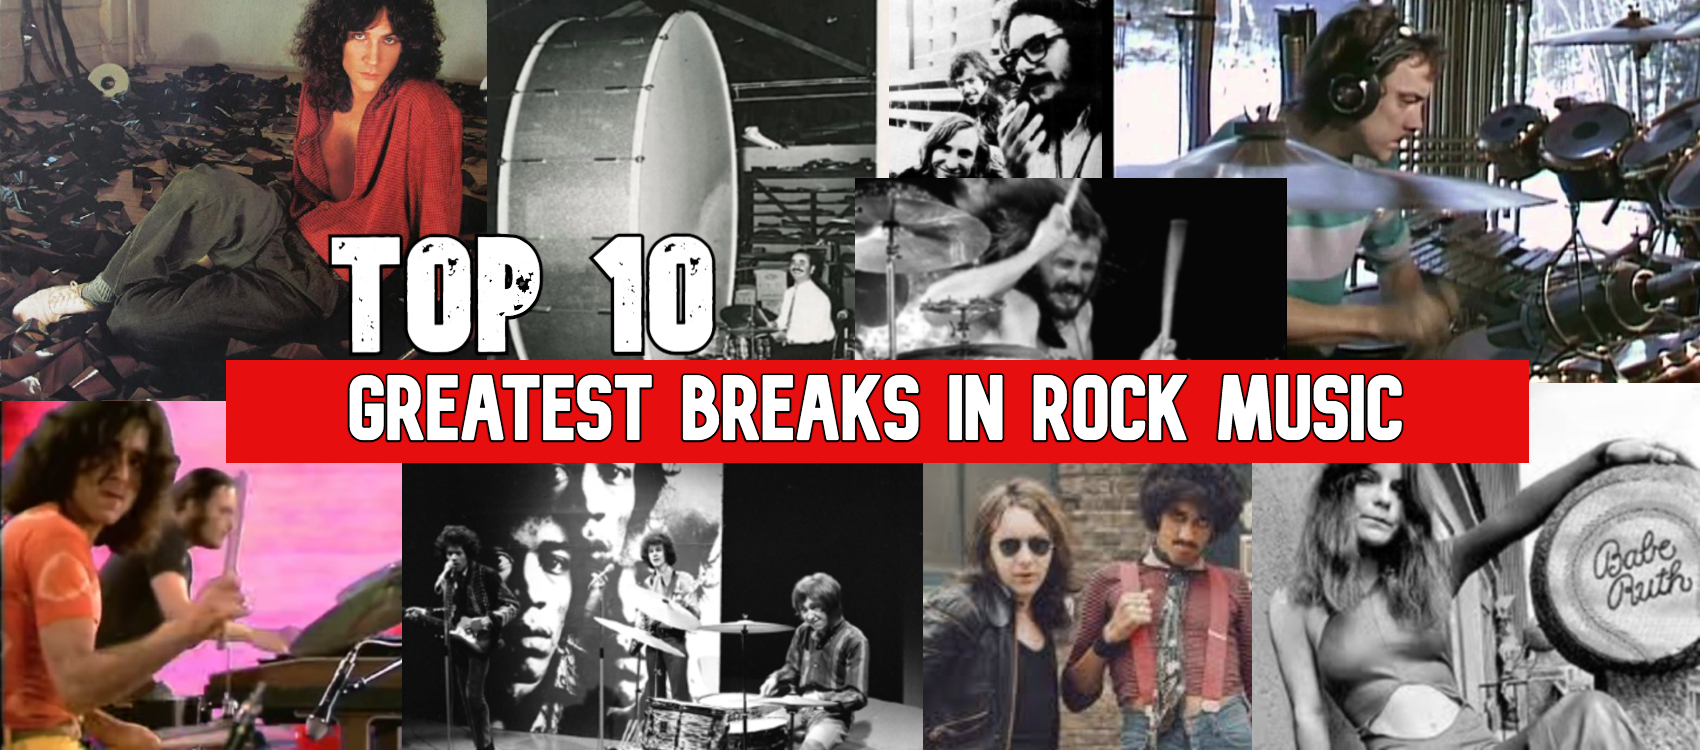 Banner for Top 10 Greatest Break In Rock Music featuring drummers and bands including Neal Peart, Mitch Mitchell & Thin Lizzy